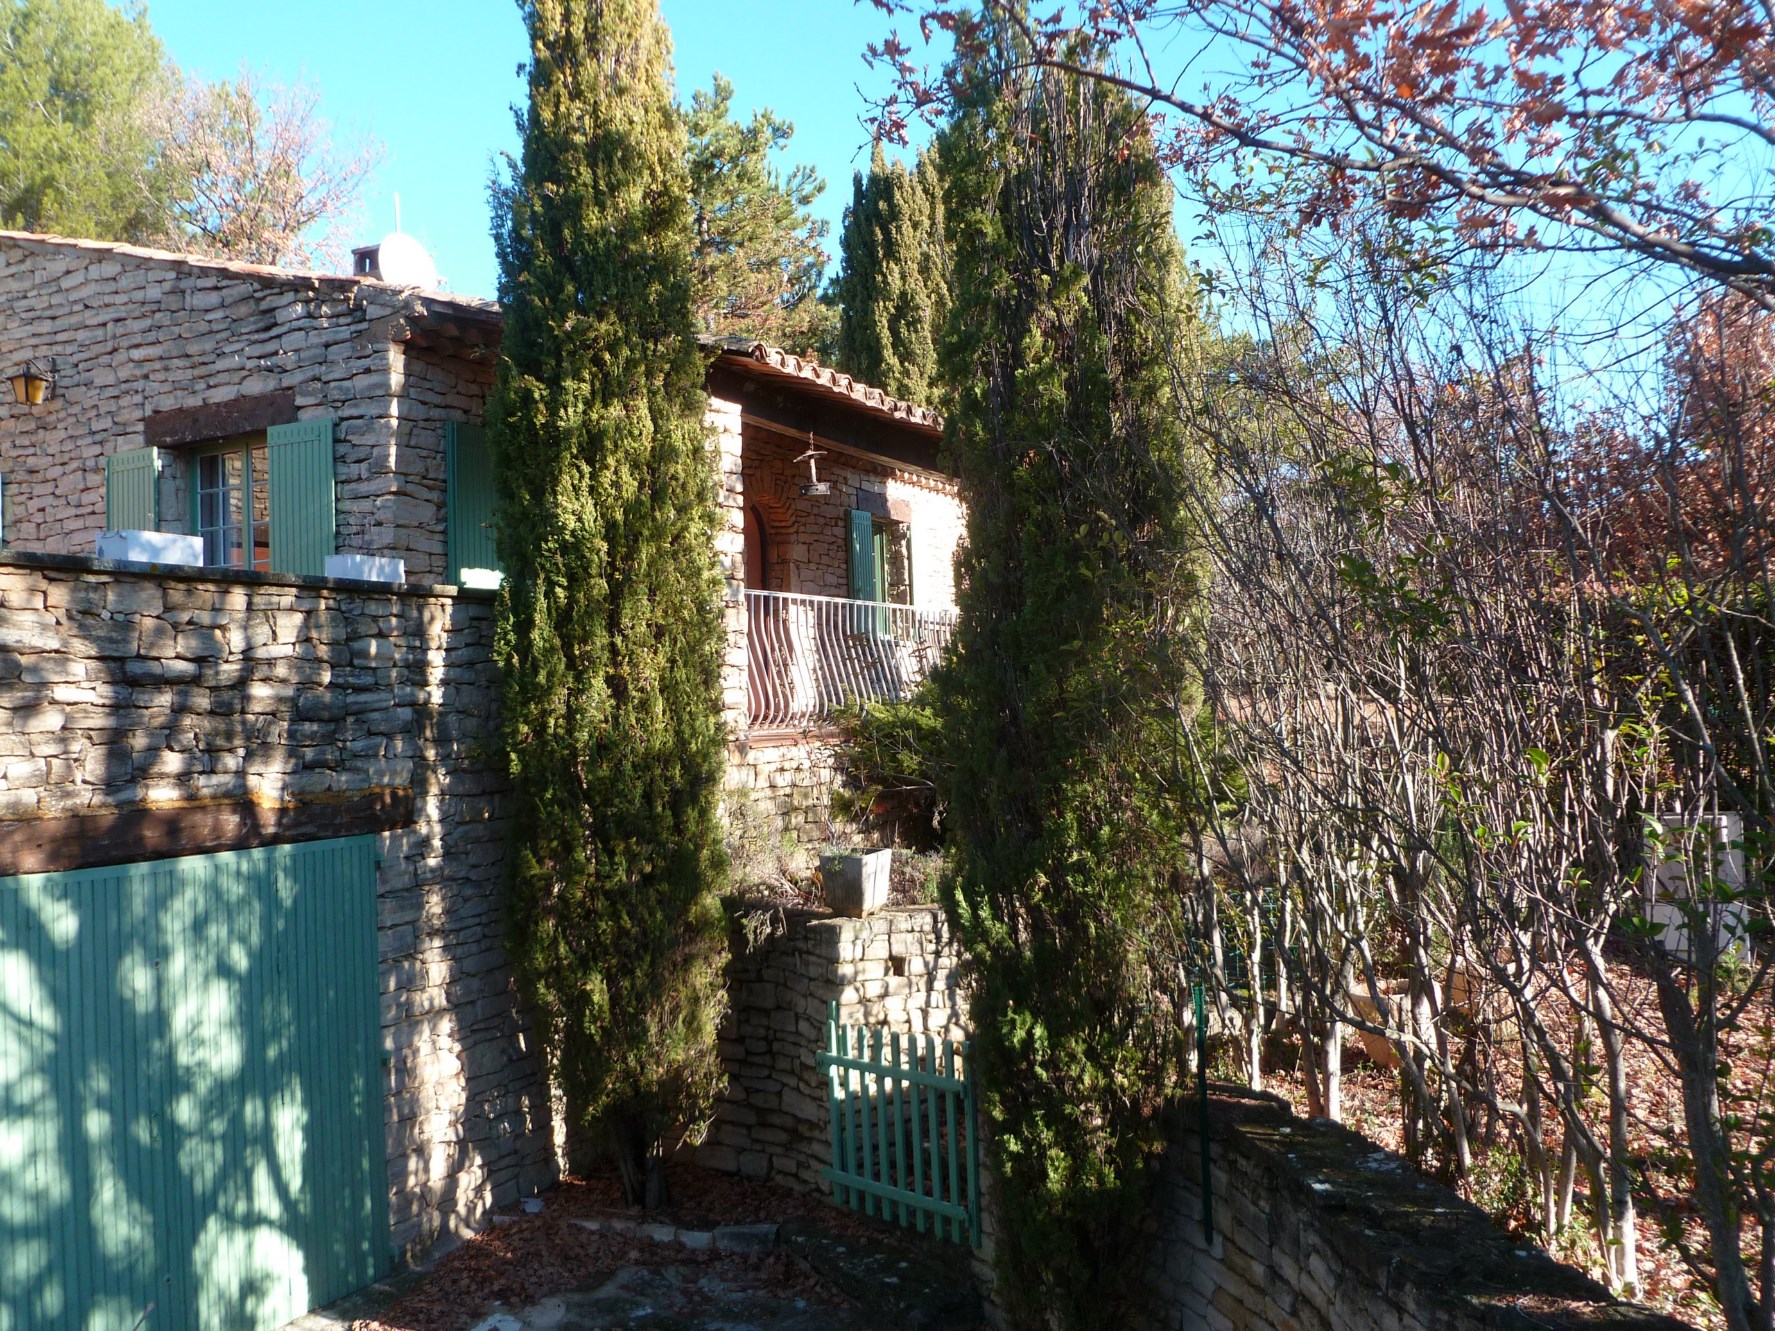 For sale in Luberon, stone house with terraces, swimming on a 6 000 m² garden